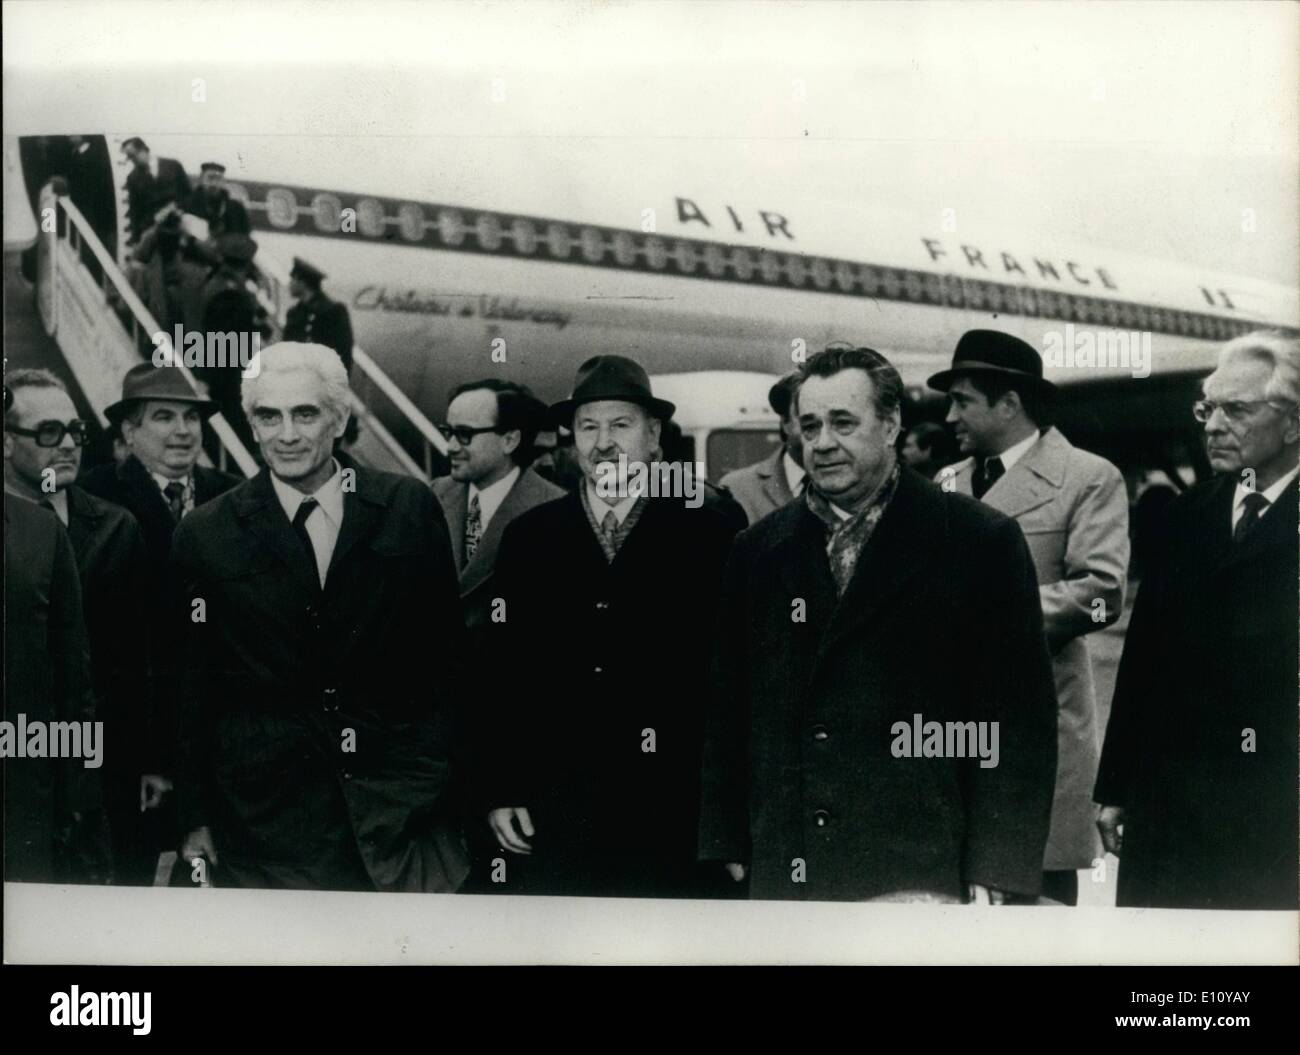 Oct. 10, 1974 - Arrival of Alvaro Cunhal in Moscow. A. Cunhal the state minister of the republic of Portugal and see Gen of the Stock Photo